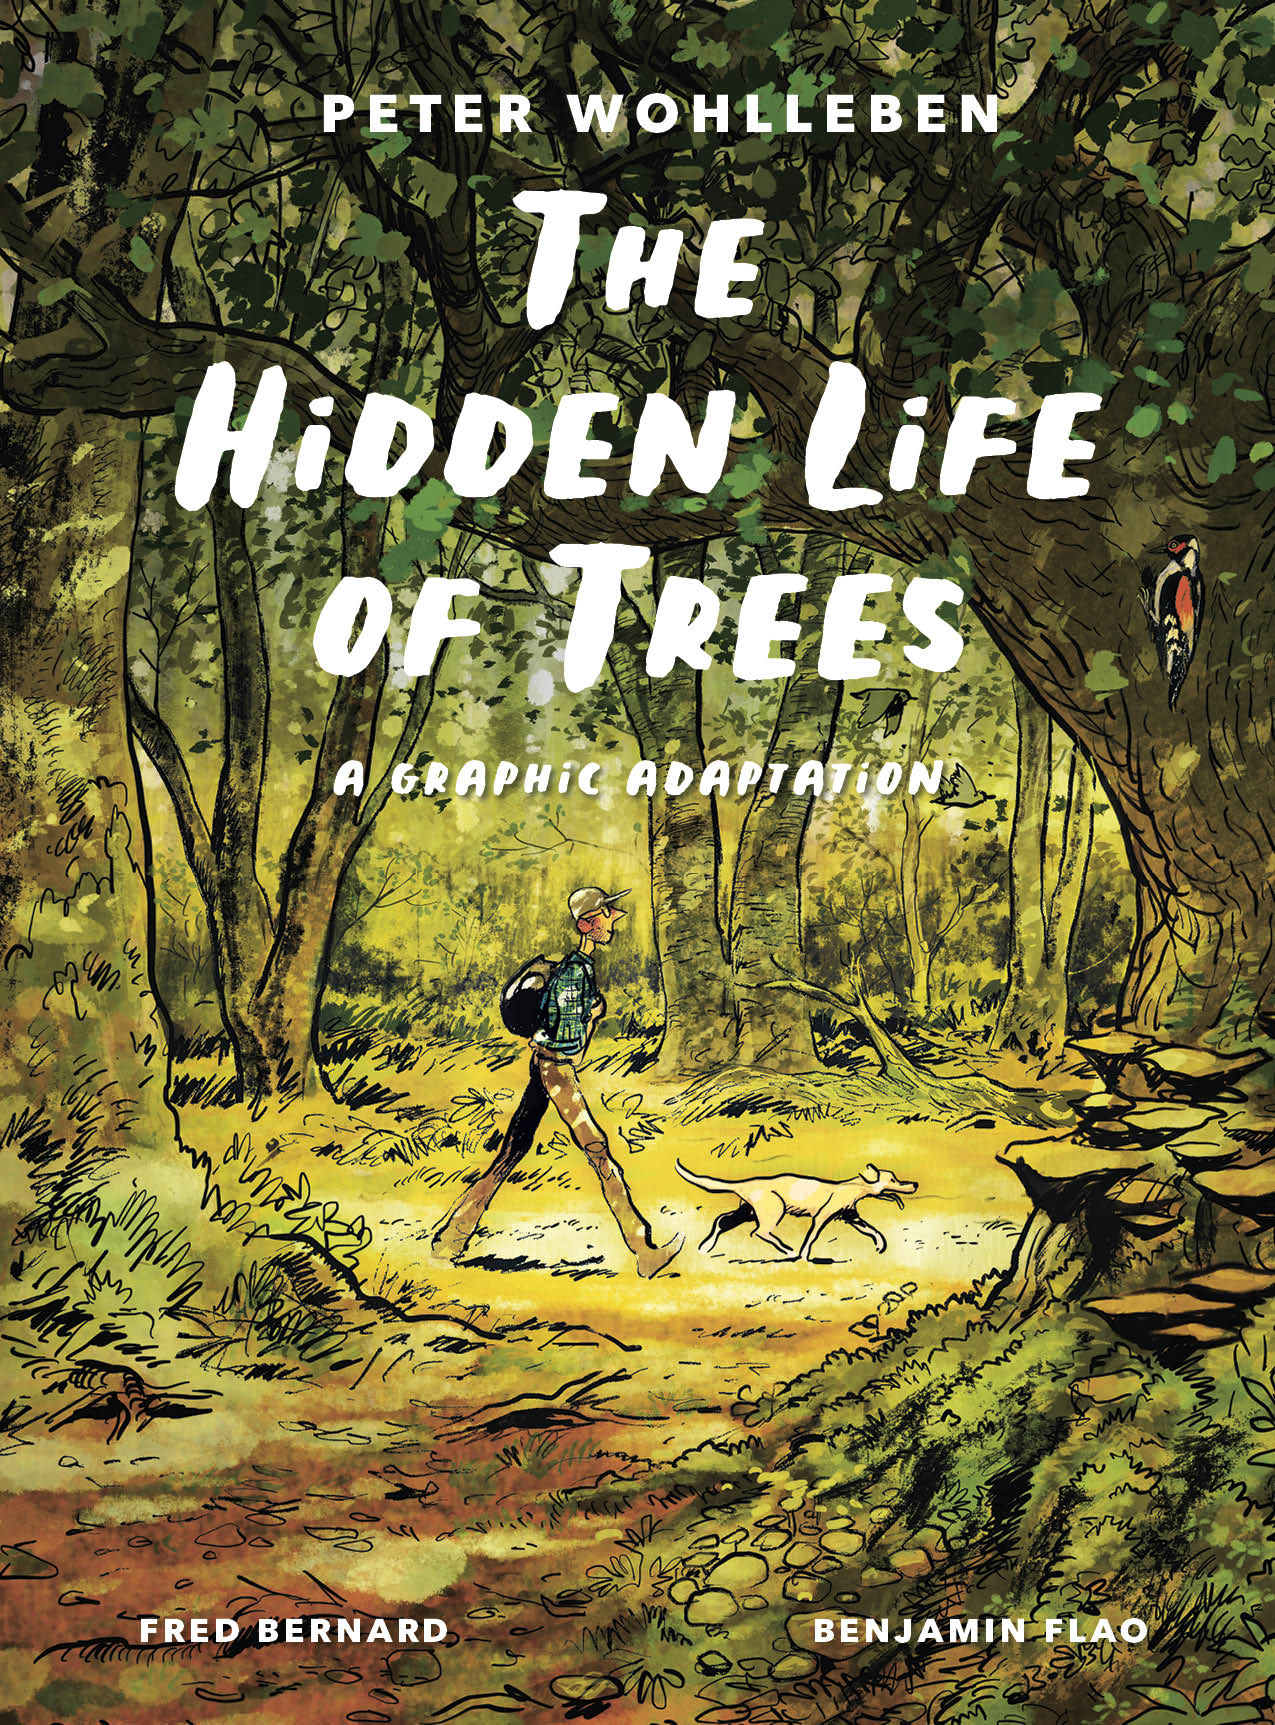 Hidden Life of Trees: A Graphic Adaptation